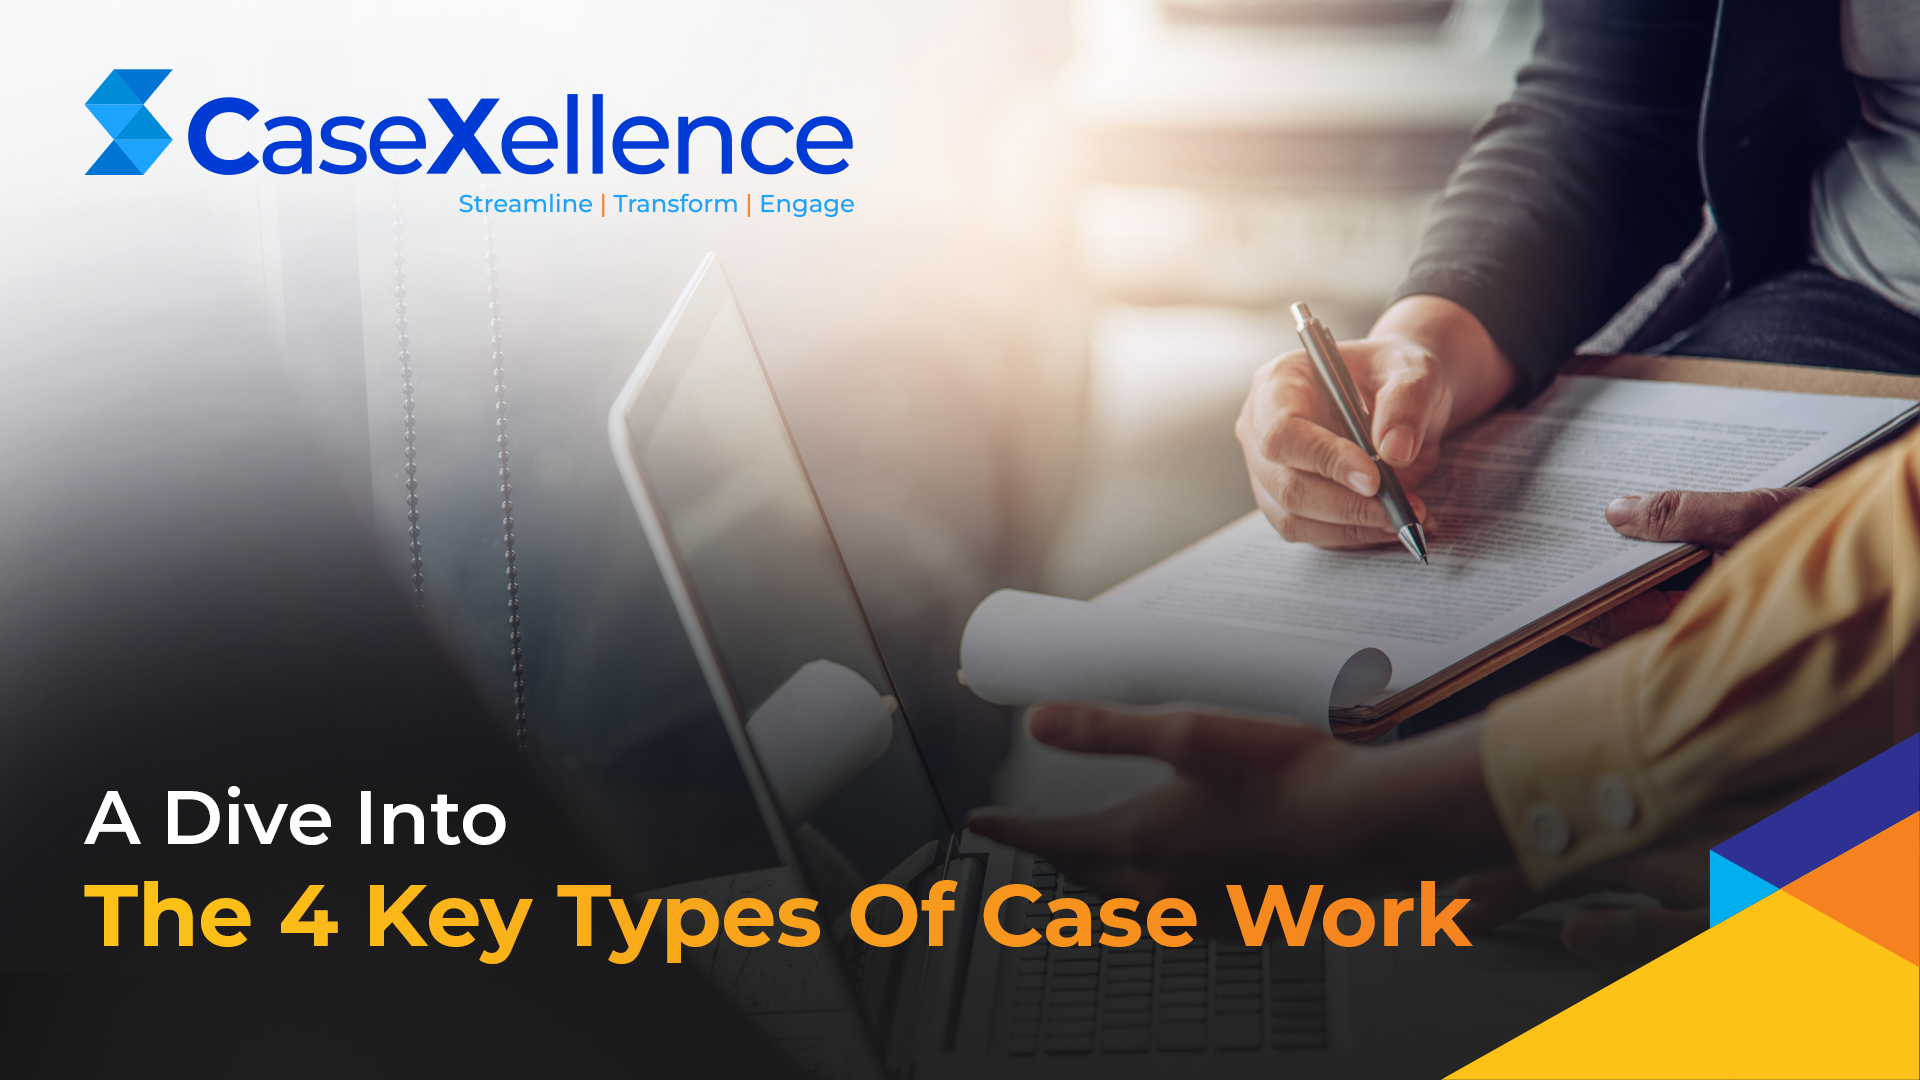 A Dive Into The 4 Key Types Of Case Work